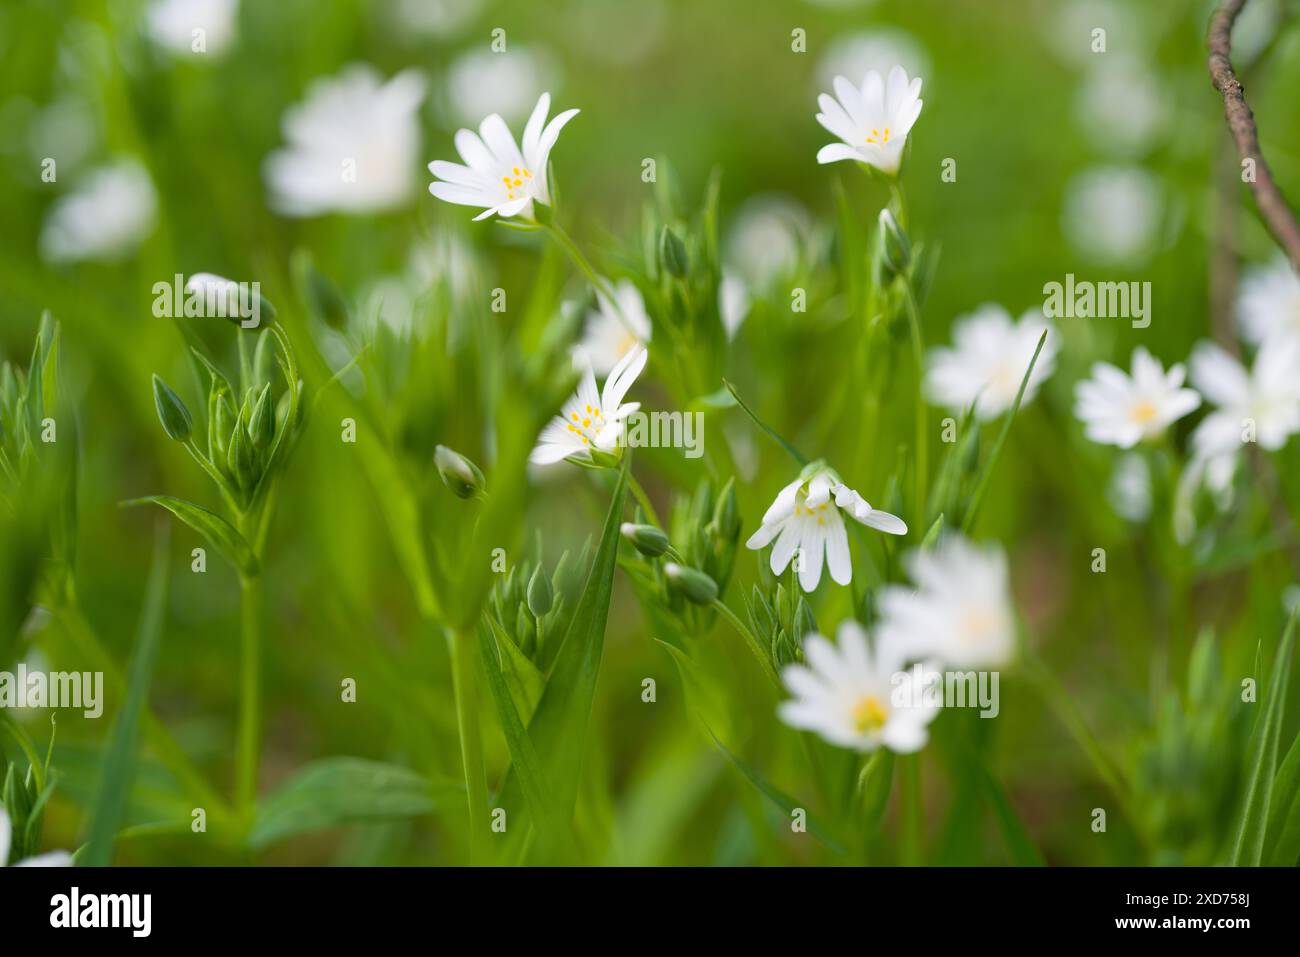 White Stellaria Rabelera blossoms in the forest with smooth green leaves and a beautiful blurred smooth fresh green background Stock Photo